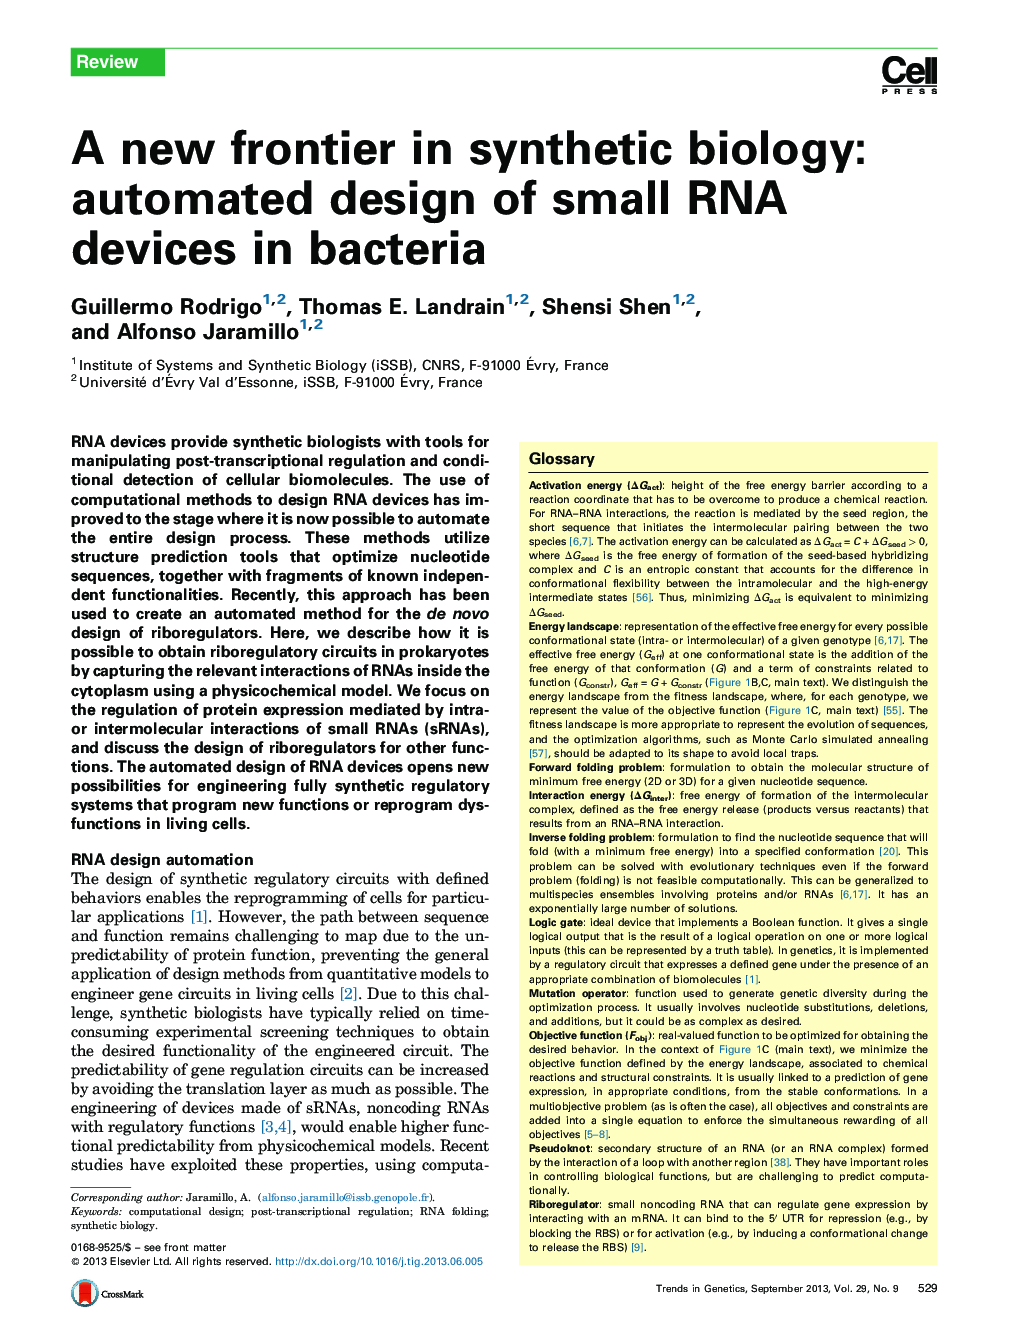 A new frontier in synthetic biology: automated design of small RNA devices in bacteria